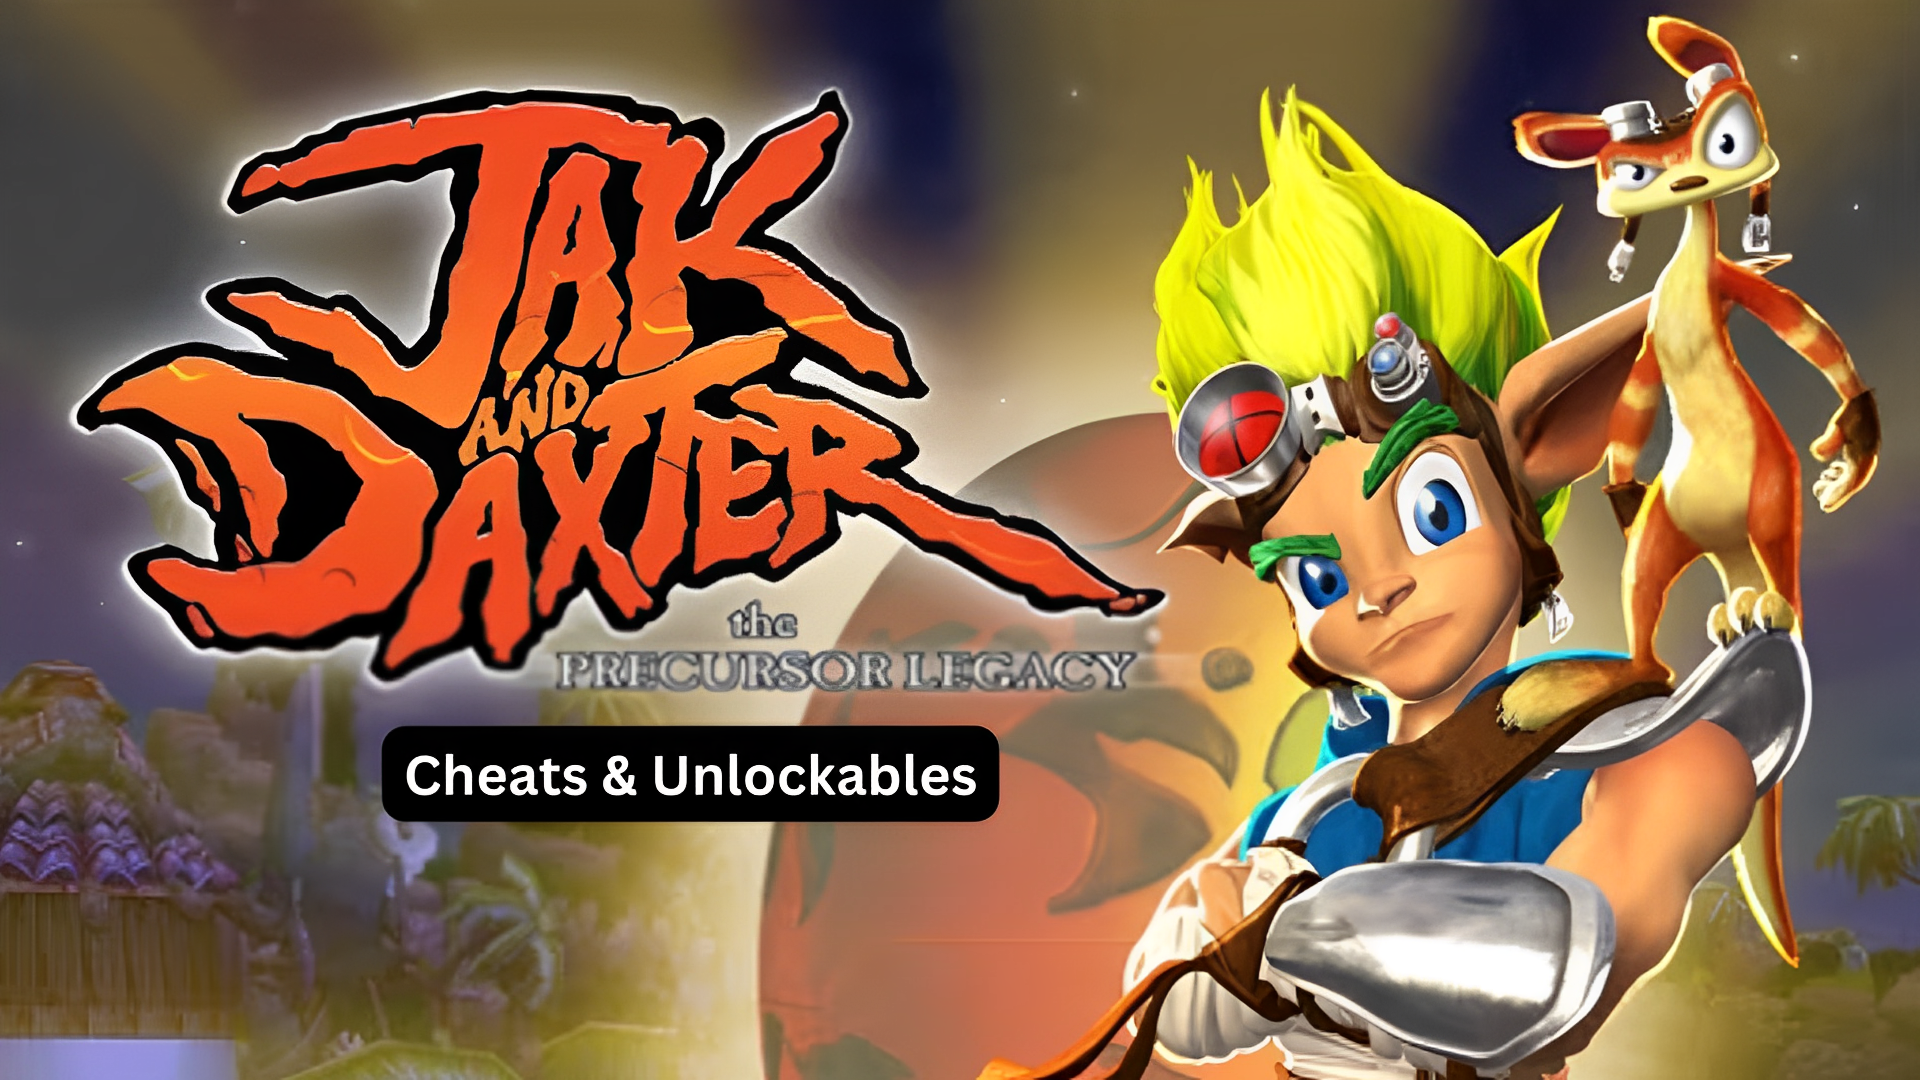 jak and daxter: the precusor legacy cheats and unlockables